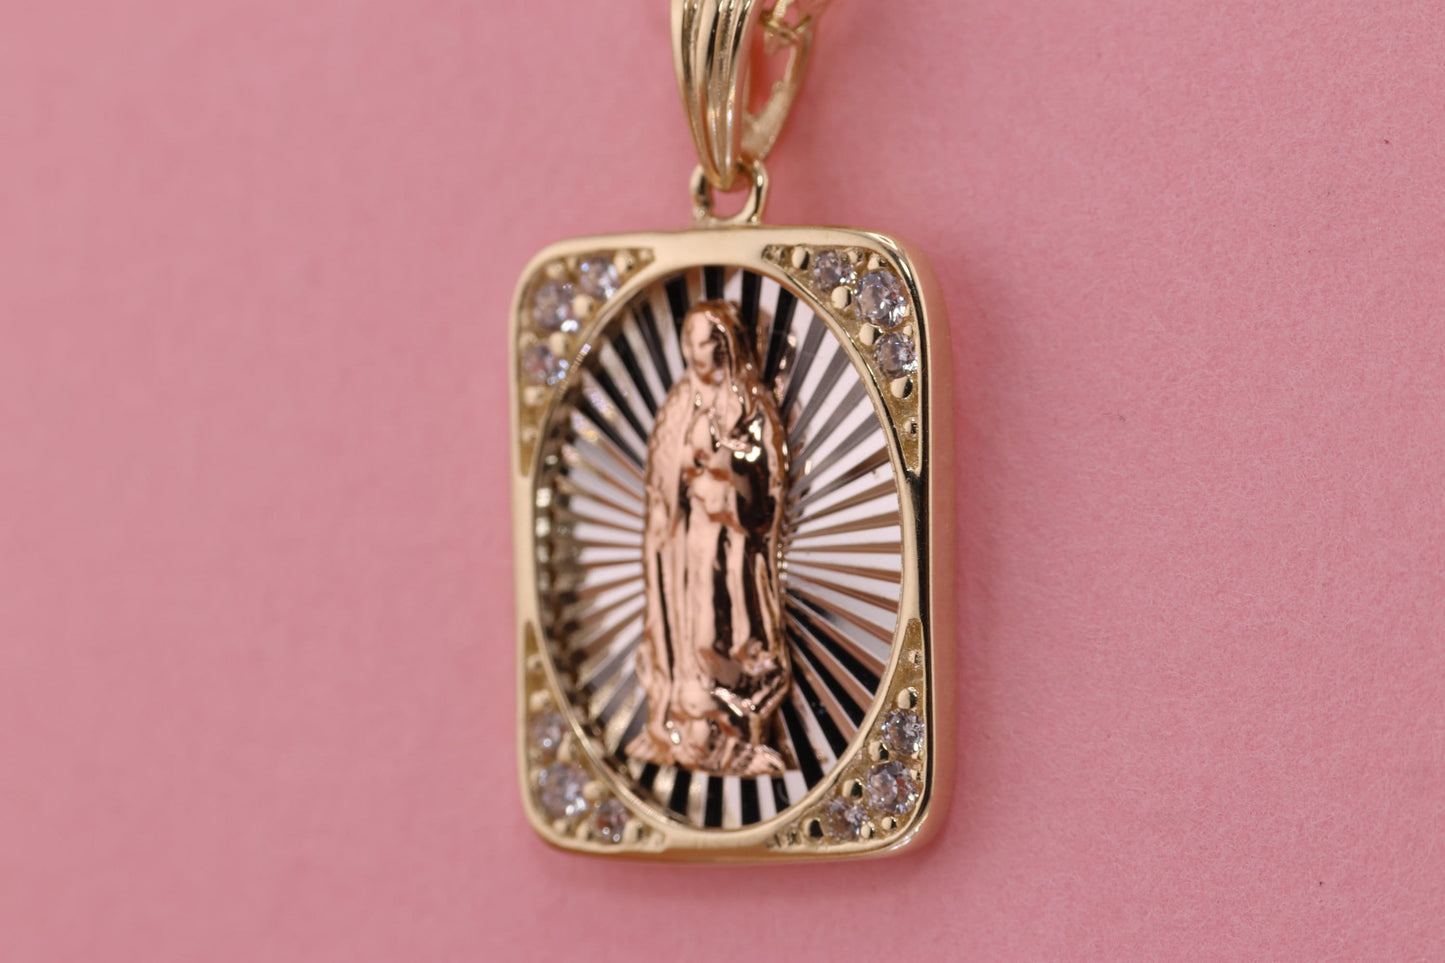 14k Solid Gold Virgin Mary Virgen Maria Lady Guadalupe Pendant E